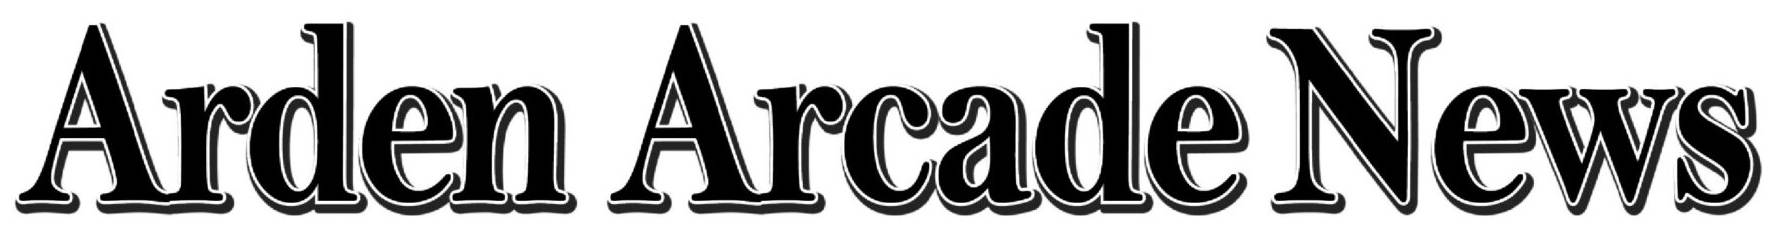 A black and white image of the word arcadia.